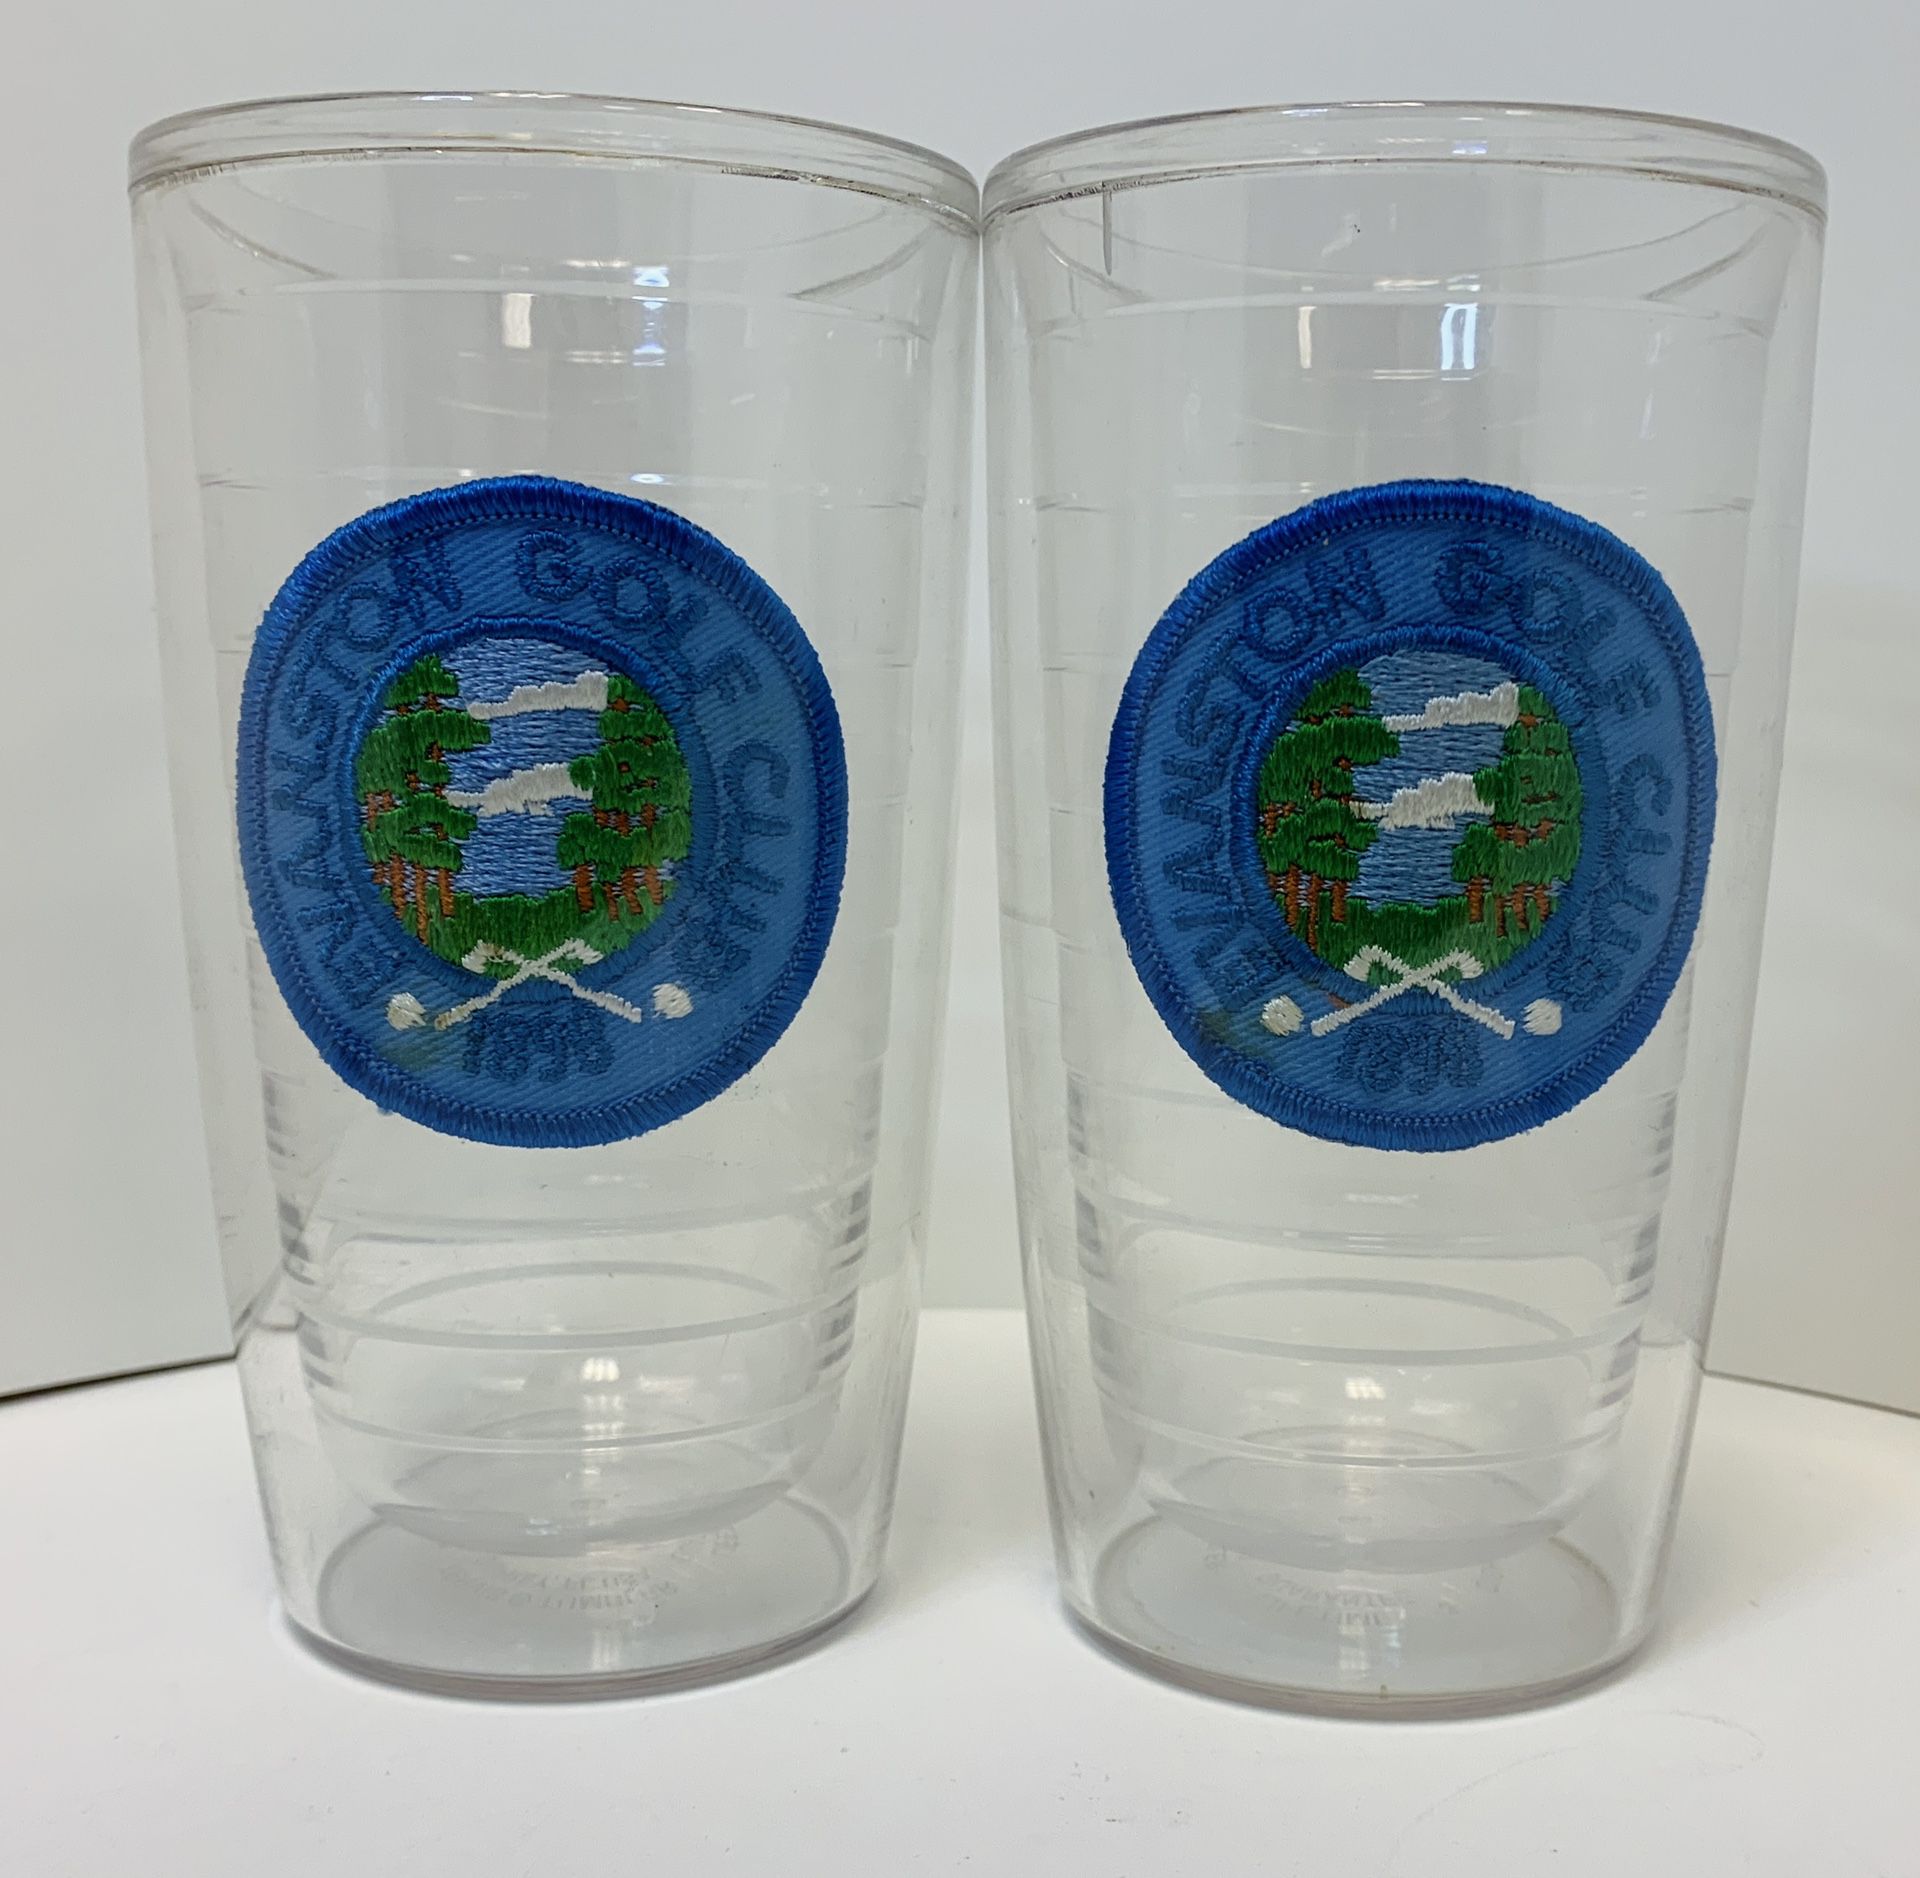 Evanston Golf Club 2 Double-Walled Plastic DRINKING GLASSES w/Club Seal Badges!